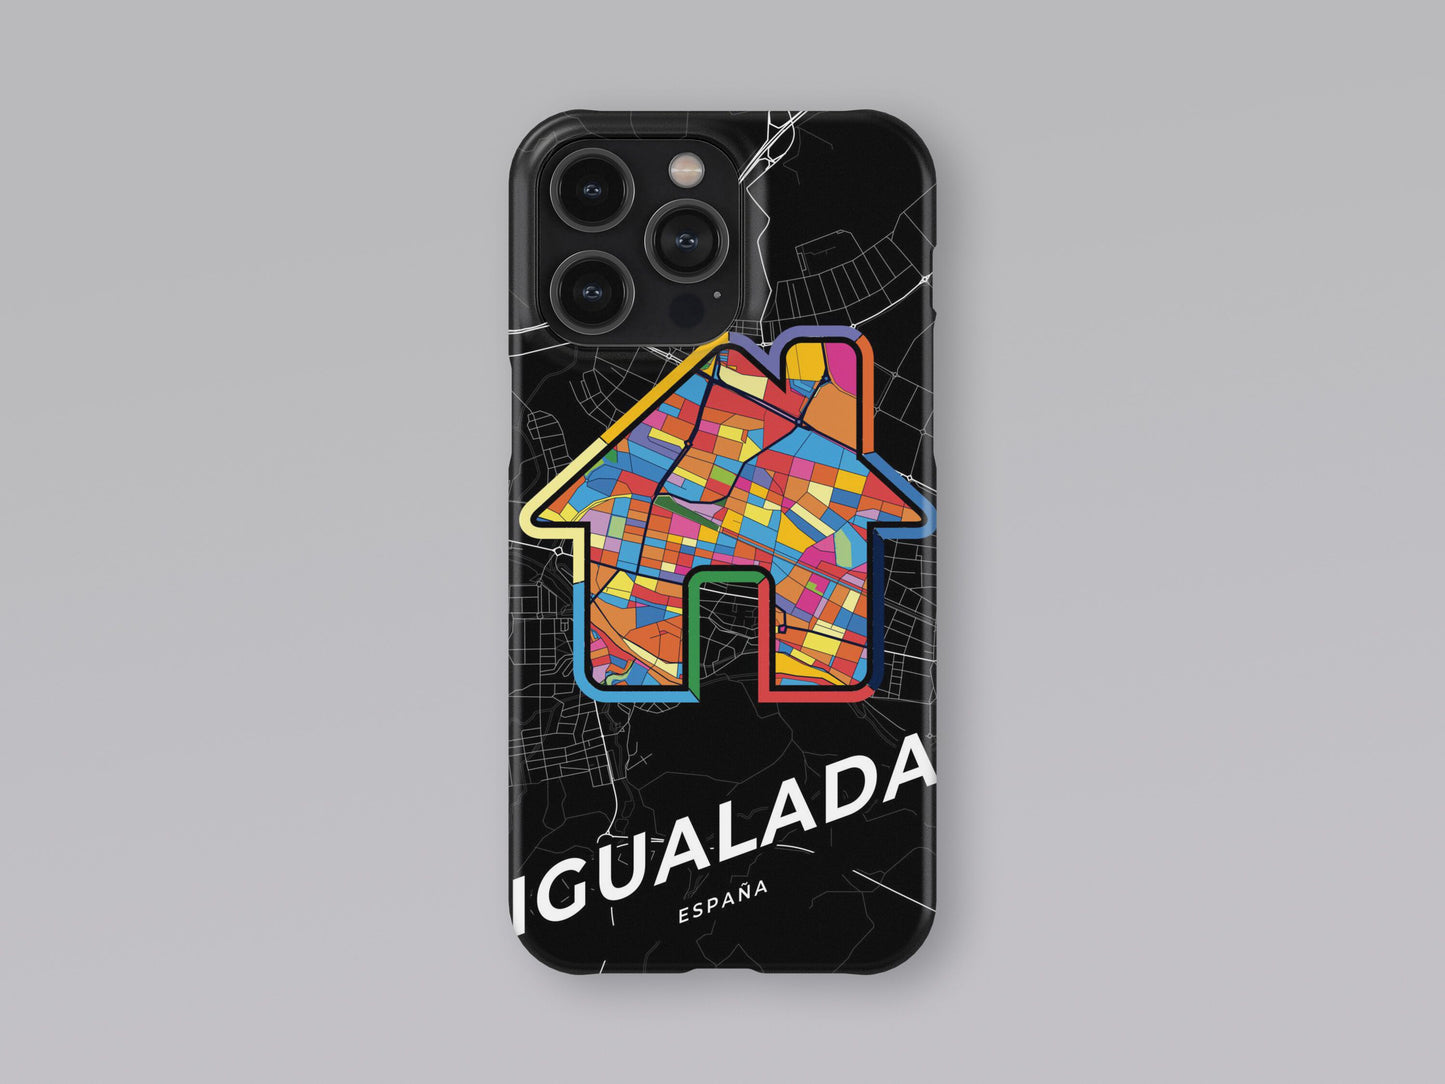 Igualada Spain slim phone case with colorful icon. Birthday, wedding or housewarming gift. Couple match cases. 3